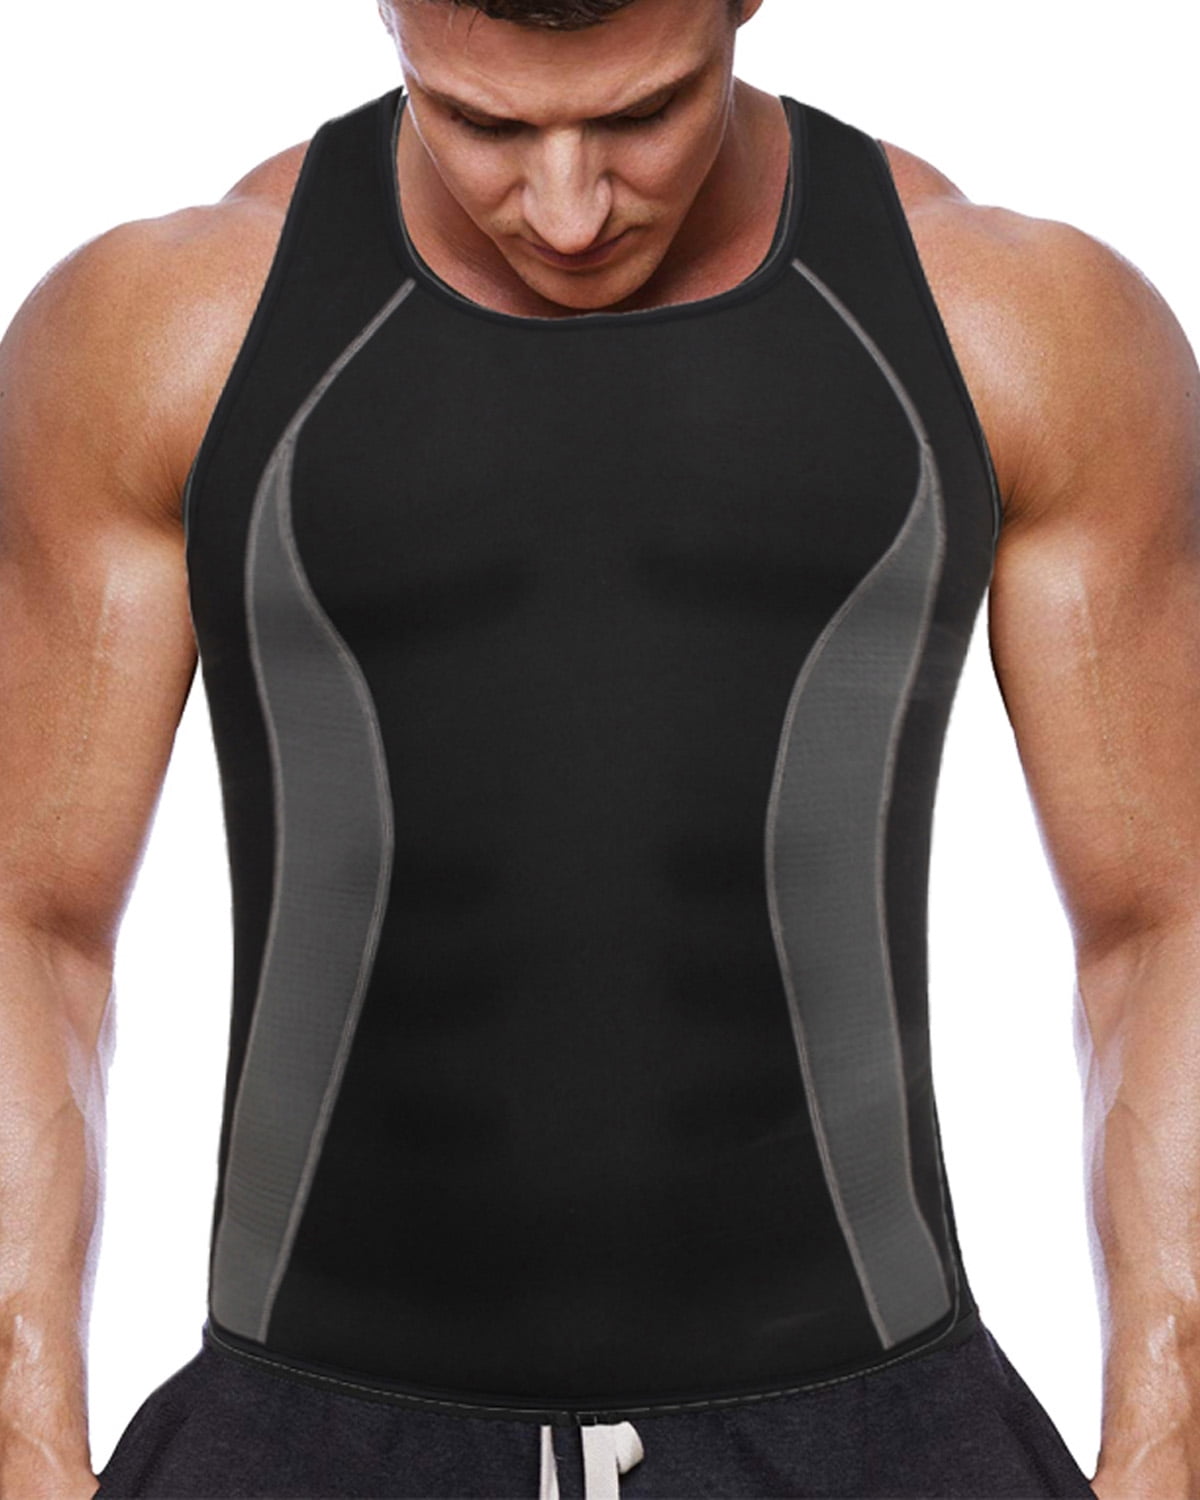 Body Top Shapewear Workout Tank Top for Running Hot Neoprene Corset Men Sauna Sweat Vest for Weight Loss Exercise Suit of Fat Burner Slimming Shirt Waist Trainer Jogging and Weightlifting